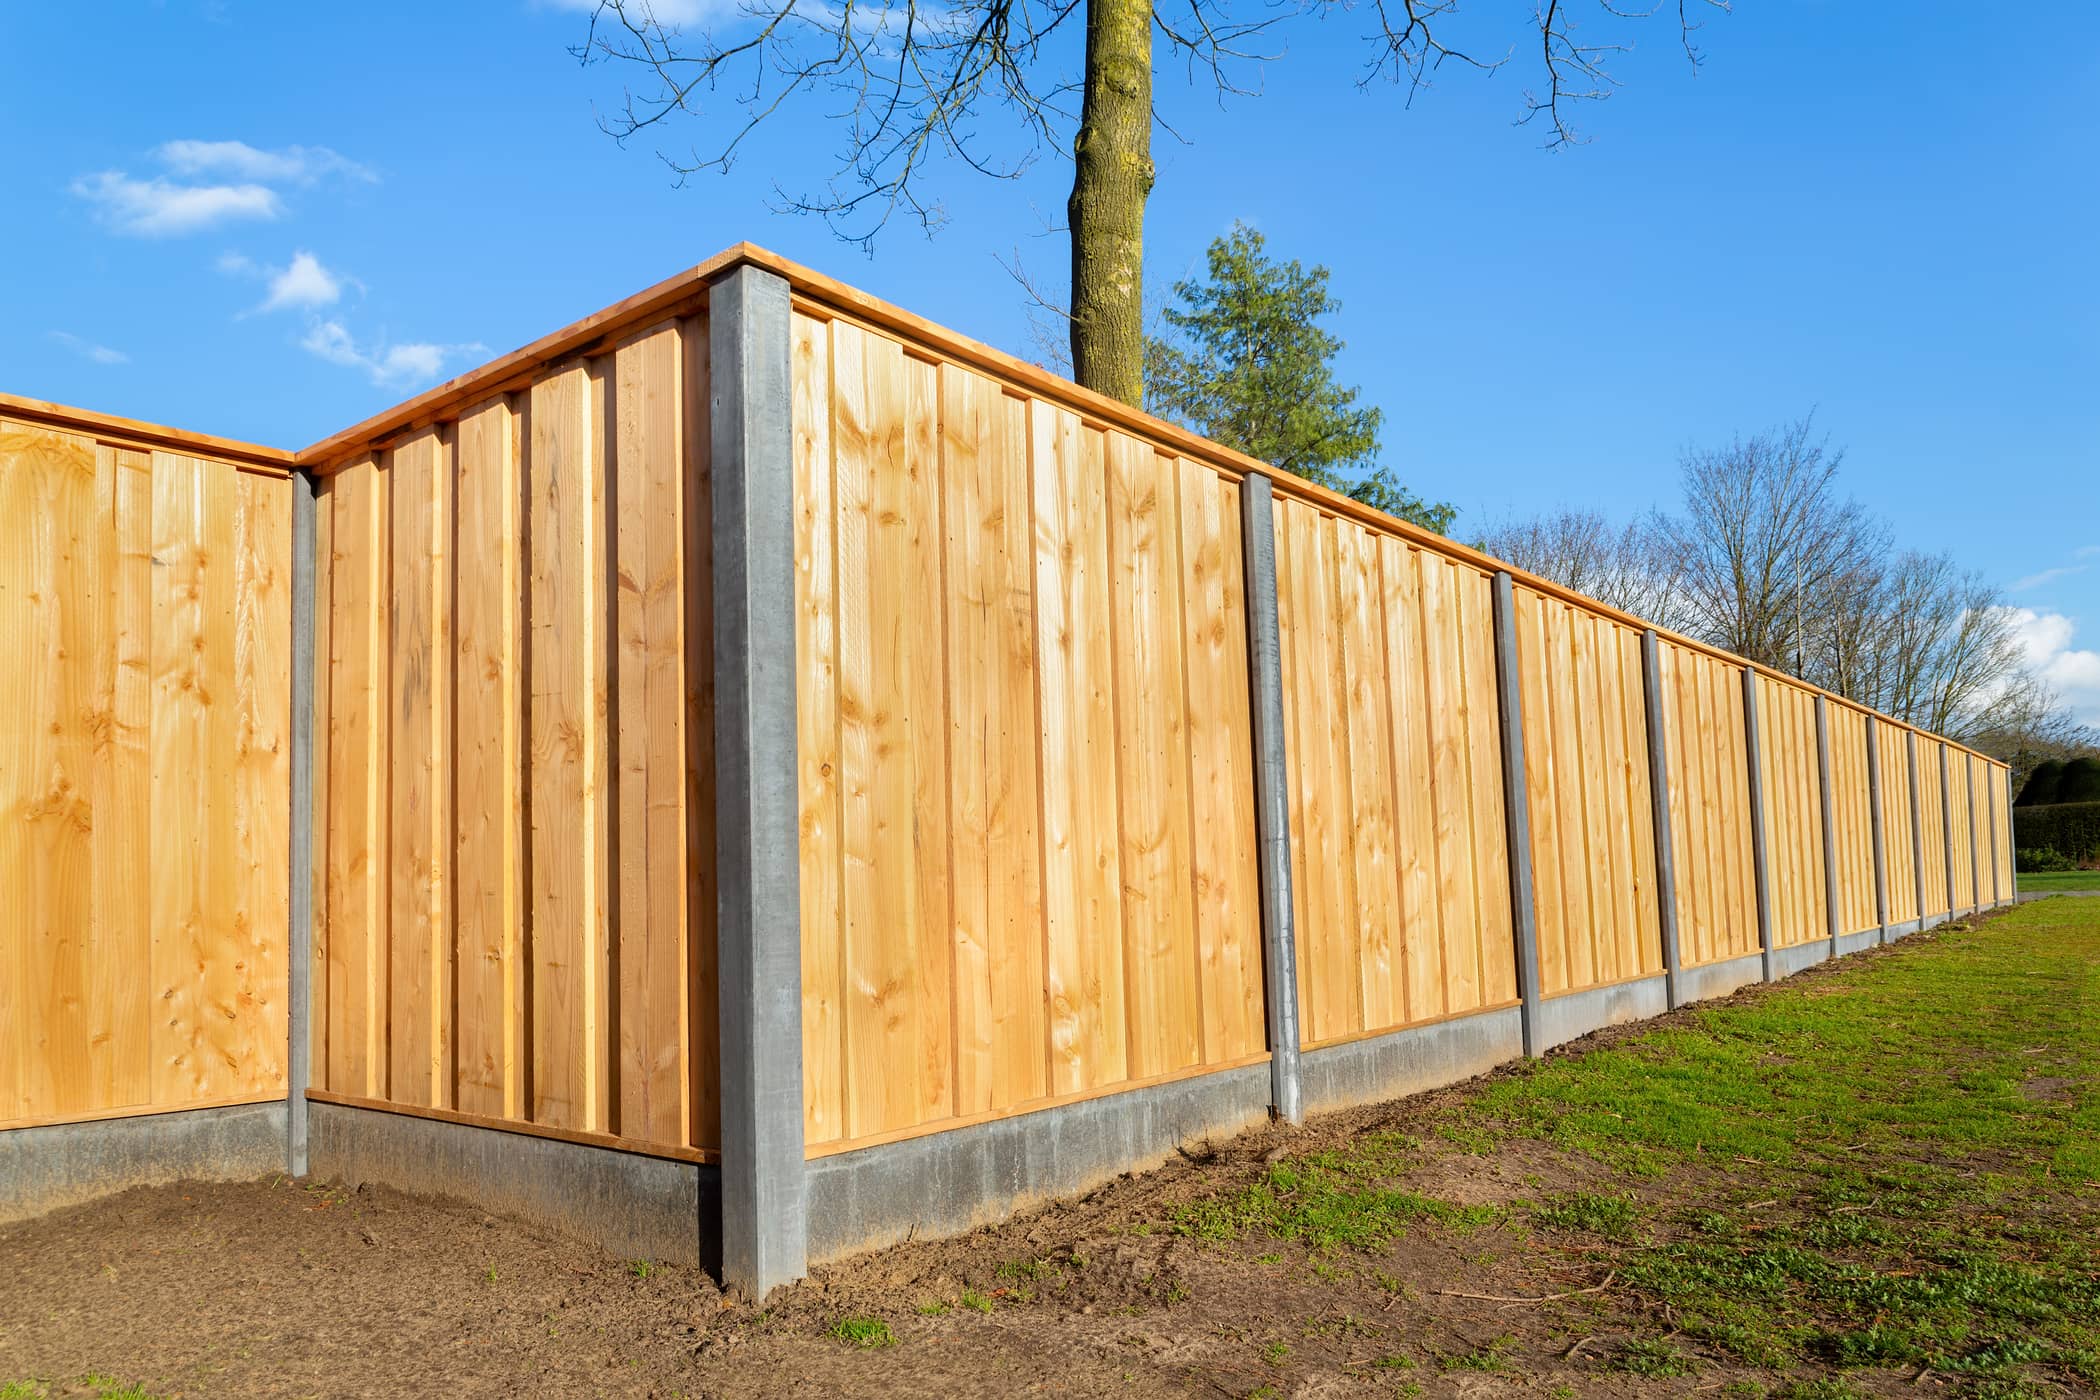 This image shows a fence that is made of both wood and concrete for extra support.